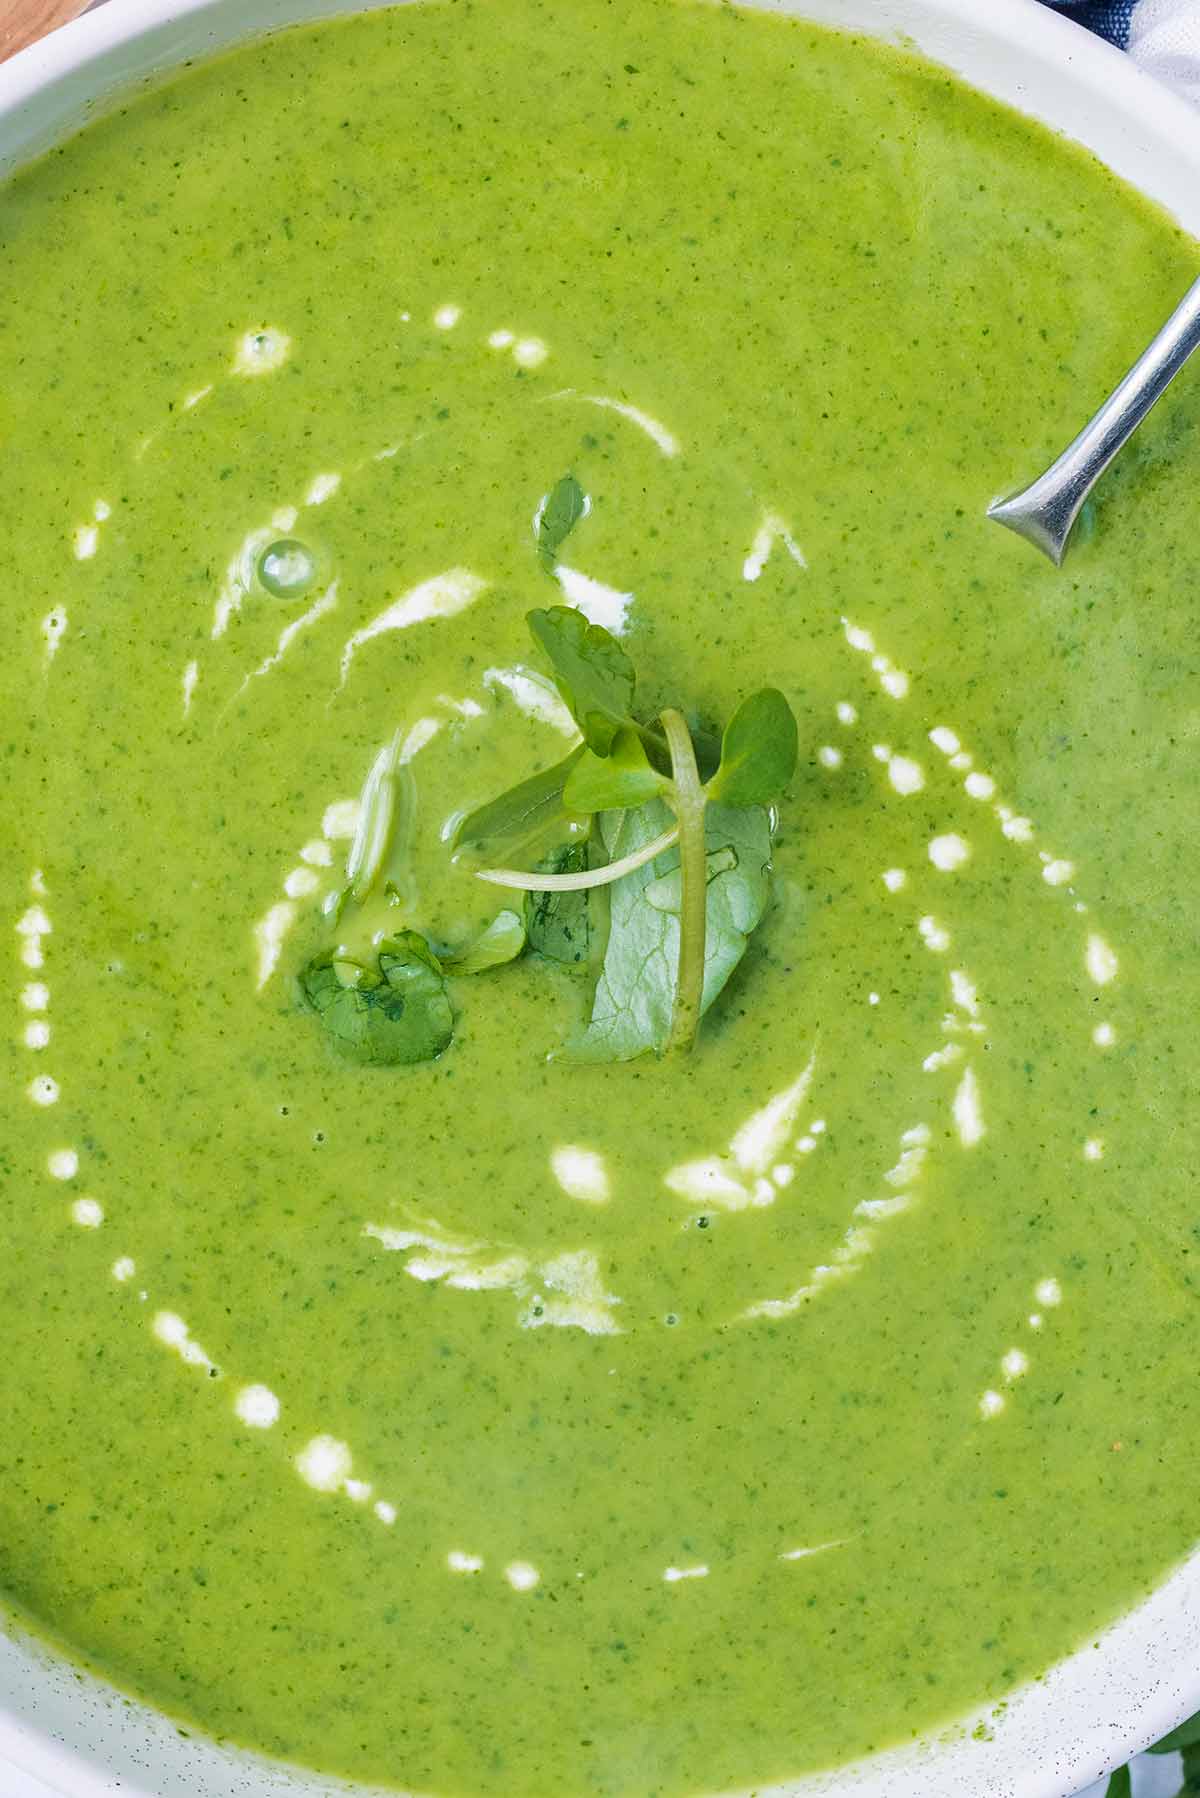 Watercress leaves and a drizzle of cream on top of some soup.